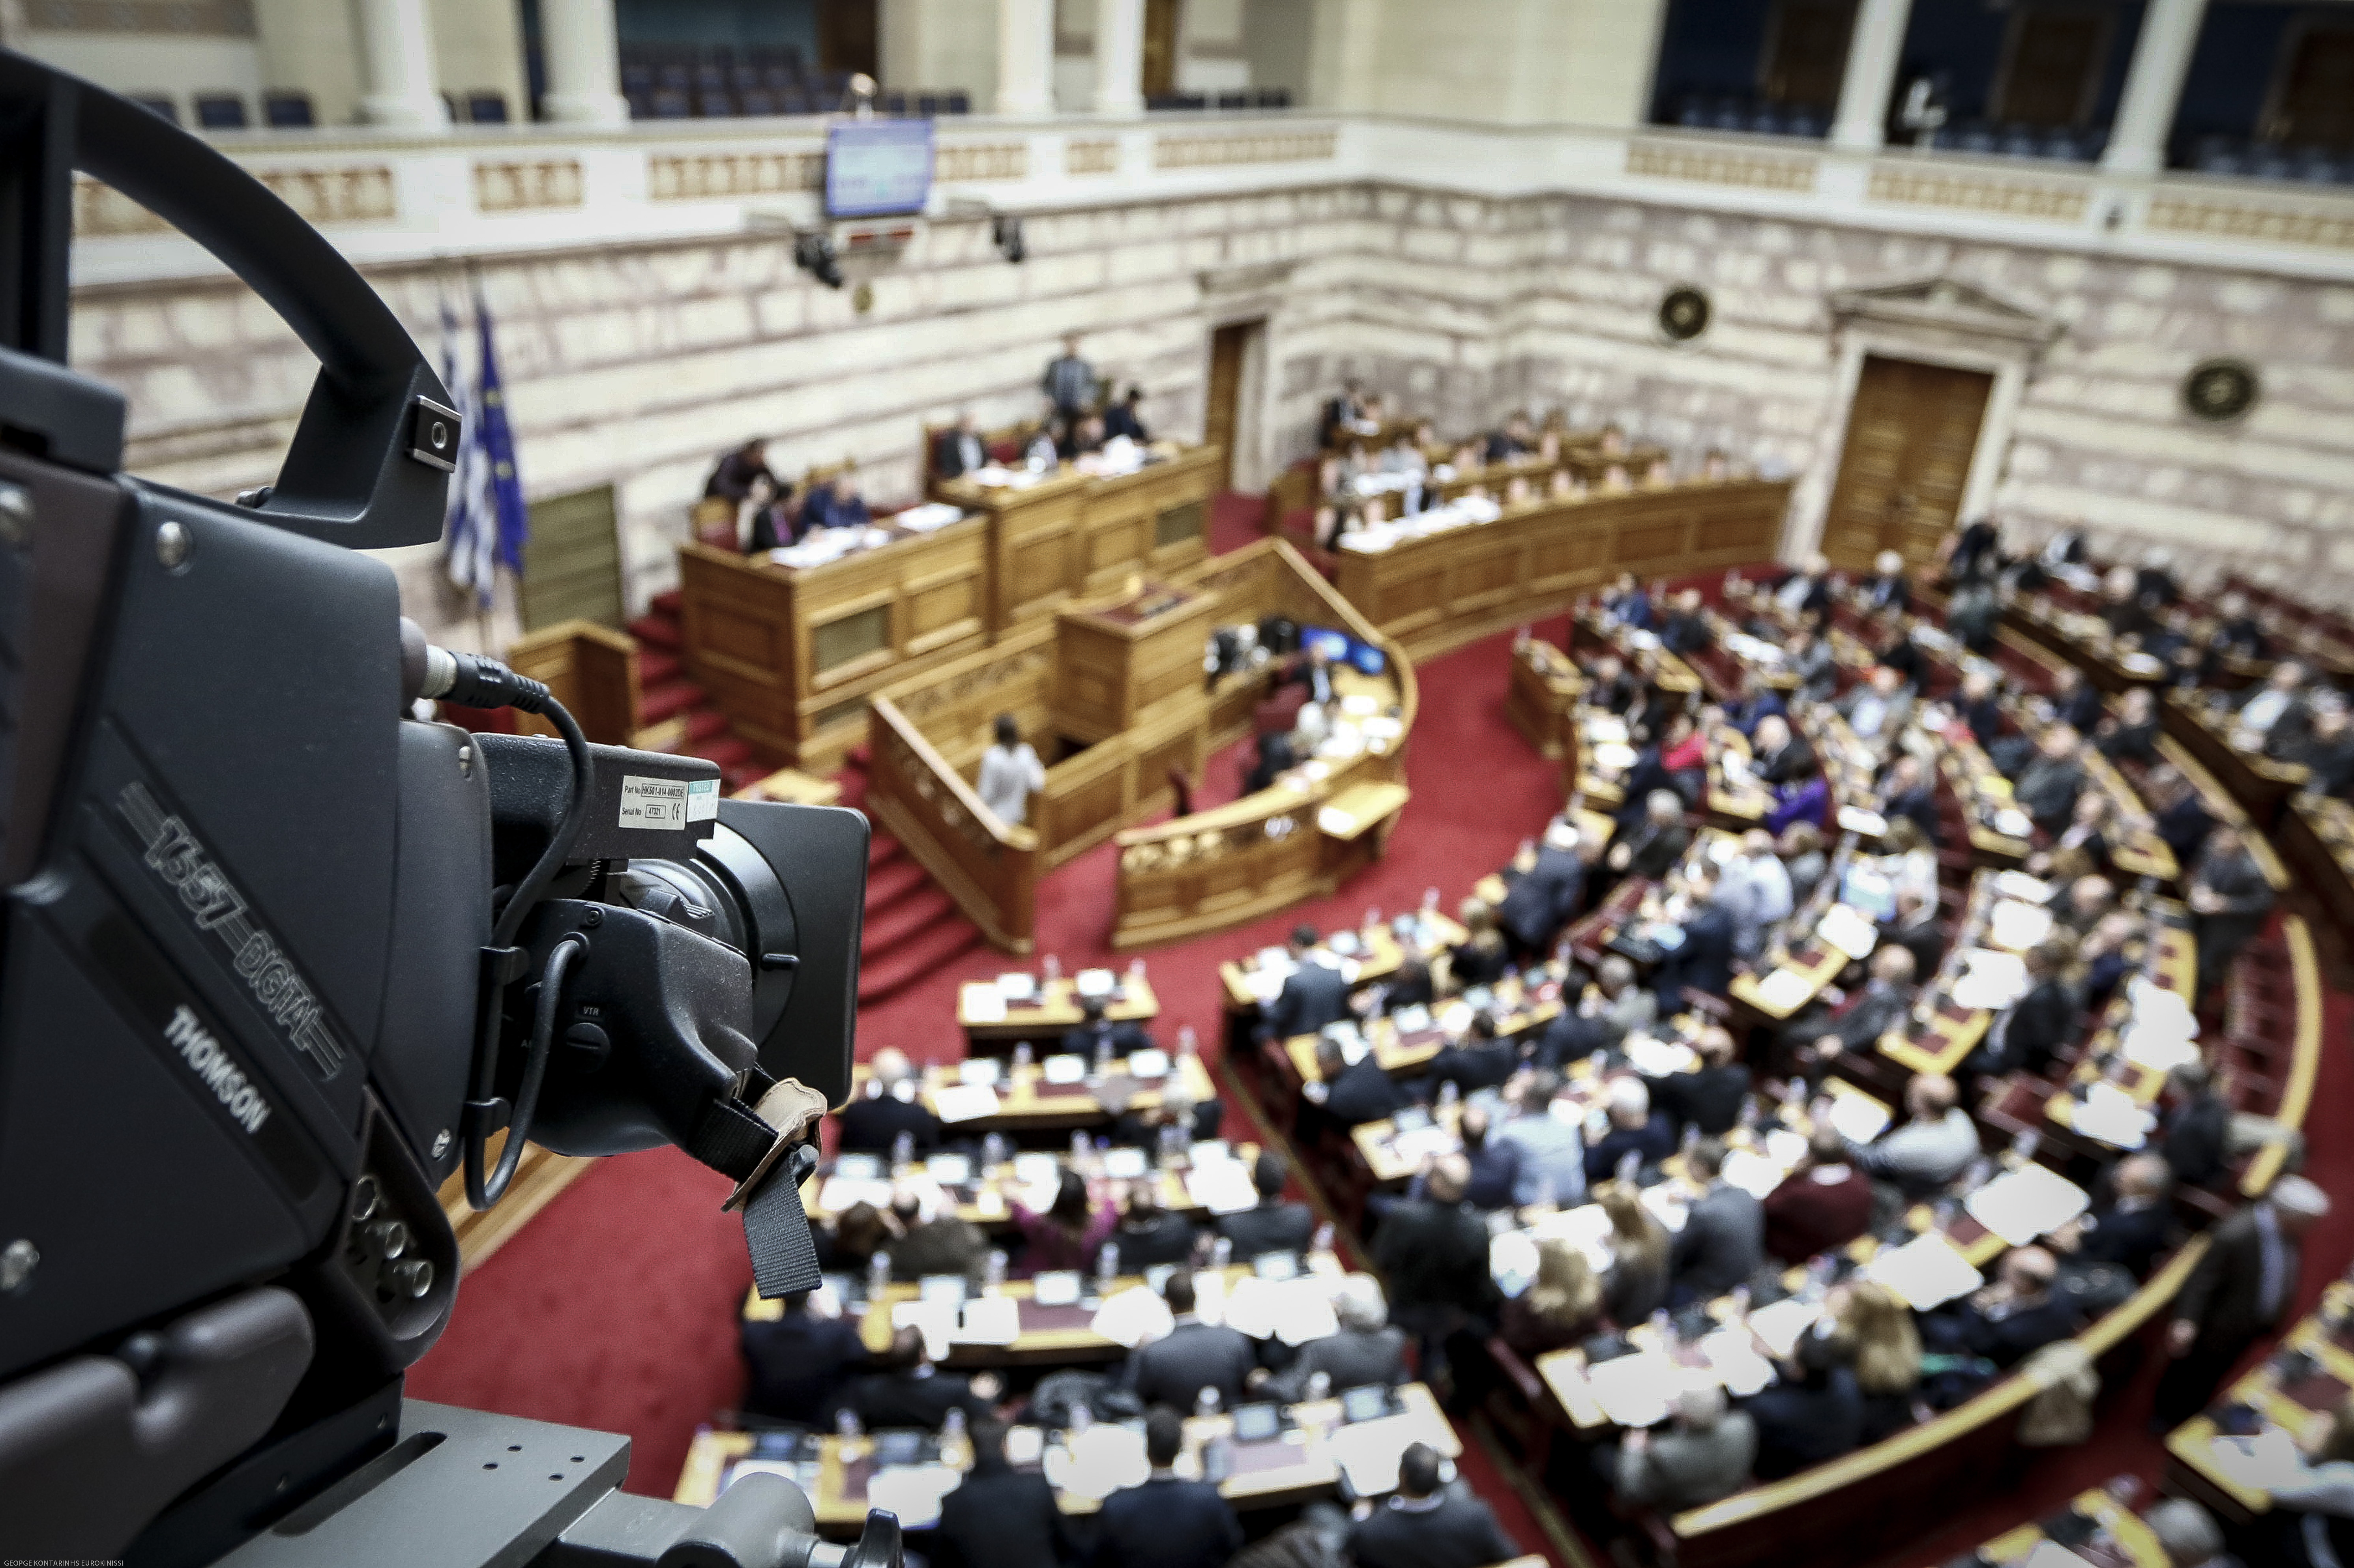 The omnibus bill that will change Greek’s lives